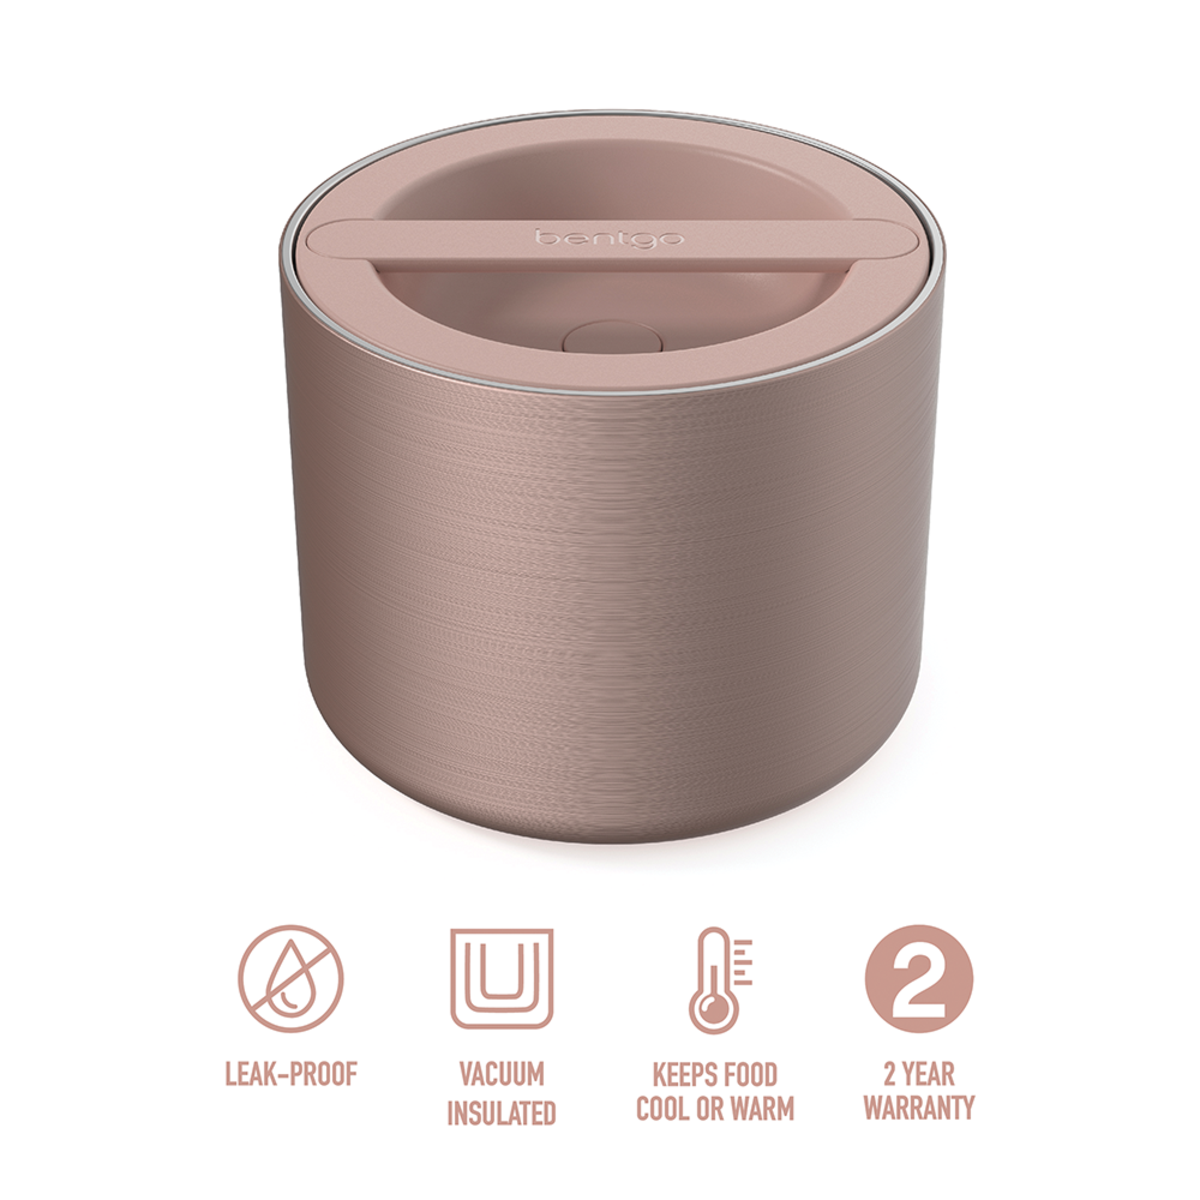 bentgo stainless steel insulated food container 560ml - rose gold